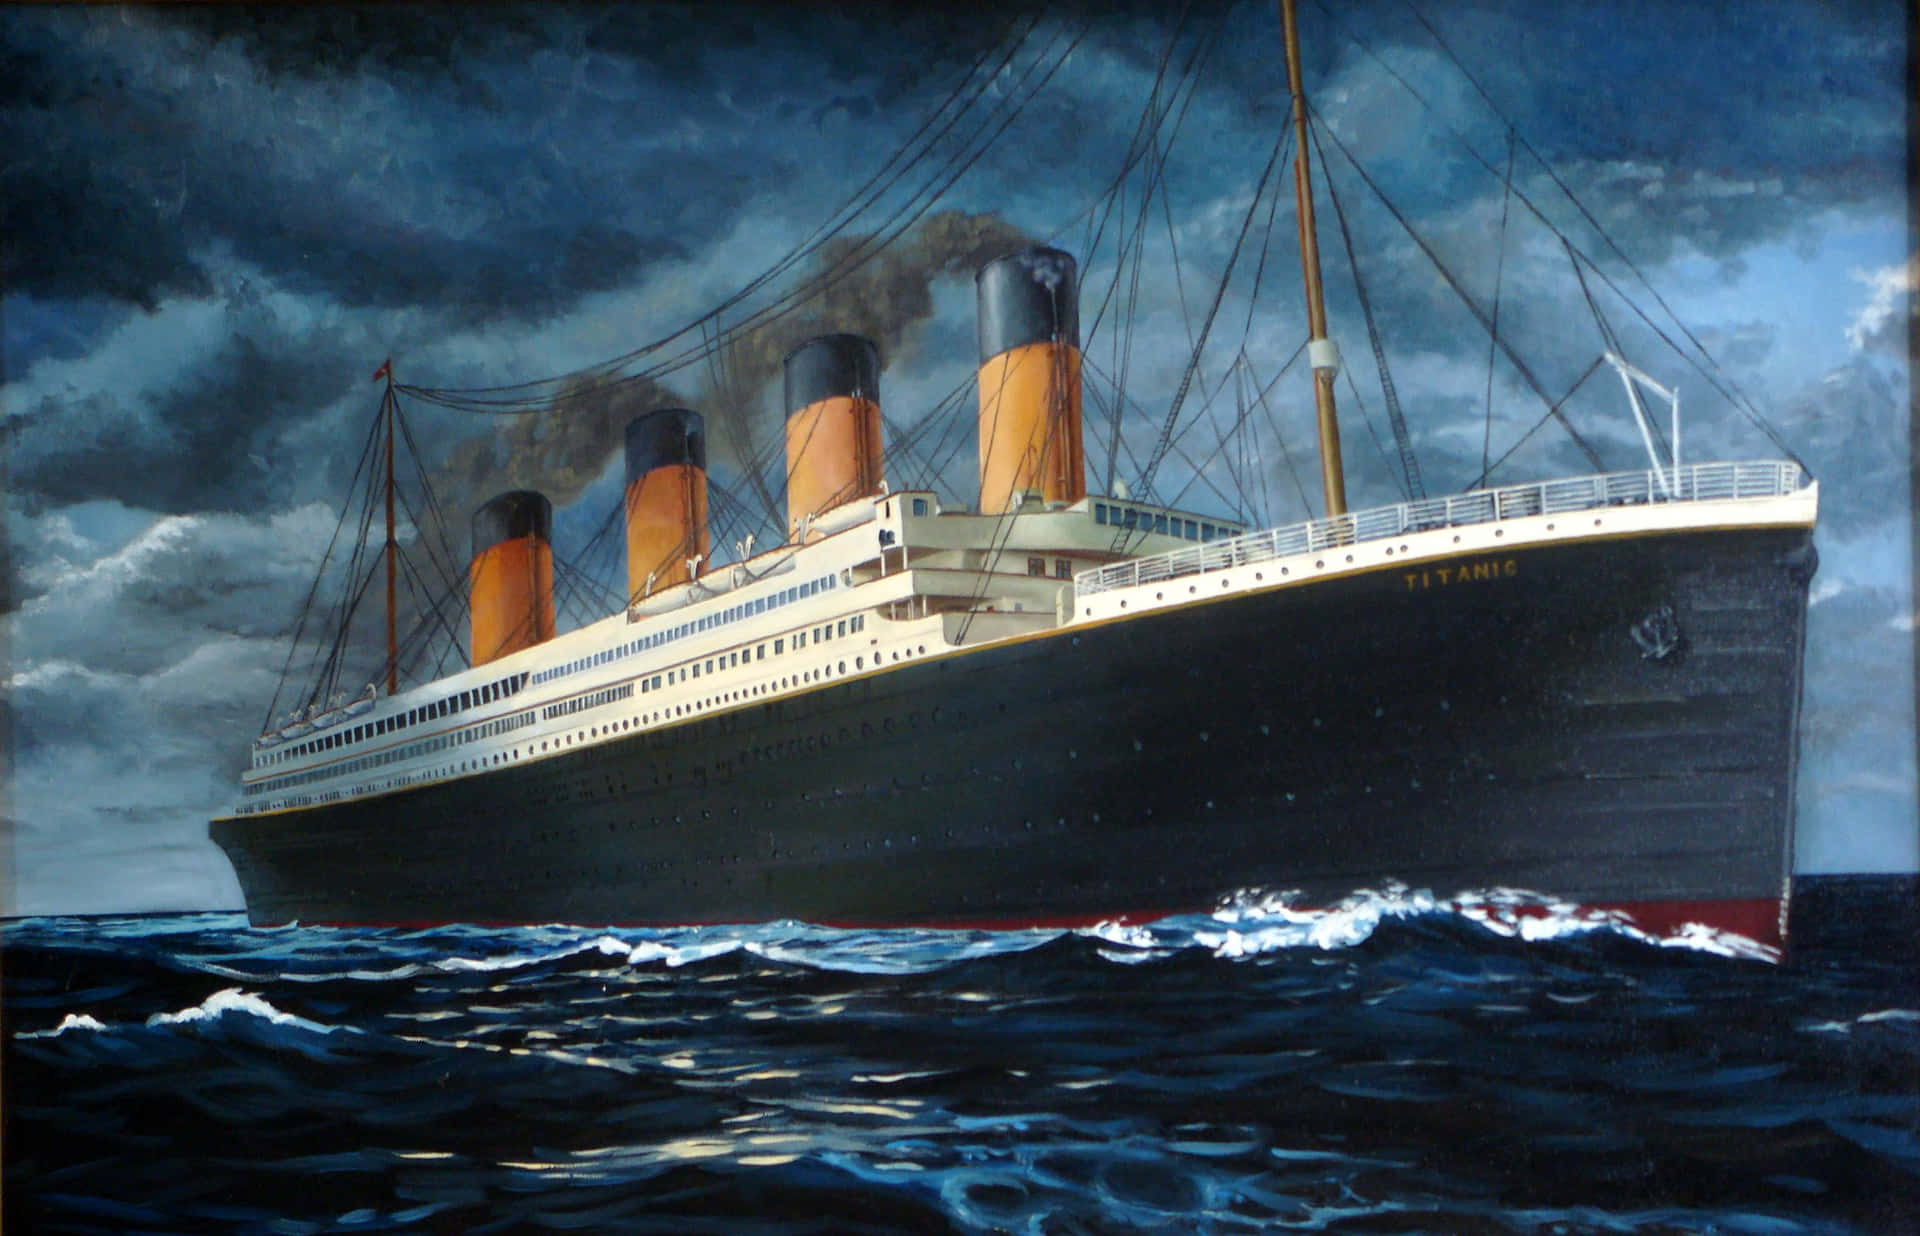 The Titanic ready to set course from Southampton